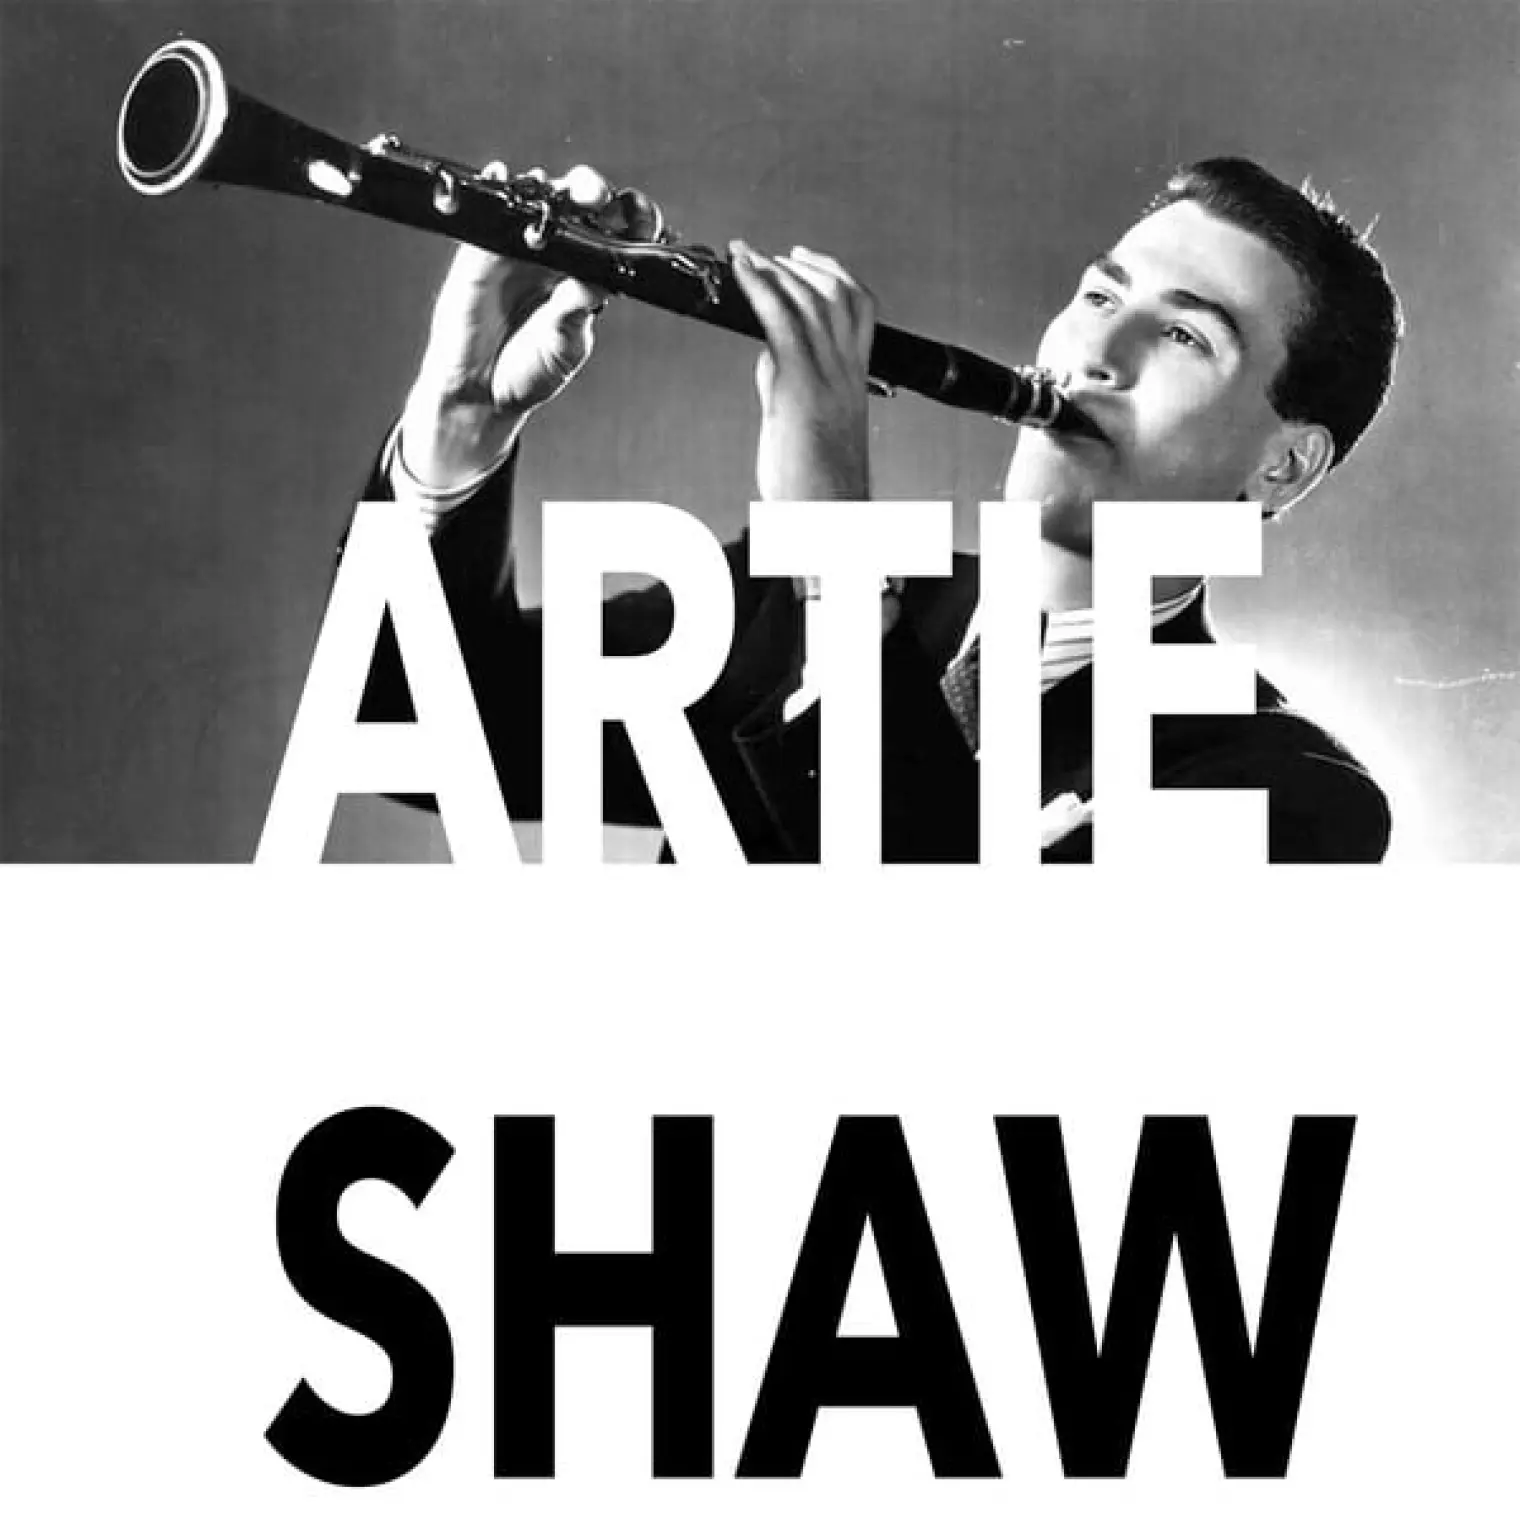 Who's Excited -  Artie Shaw 